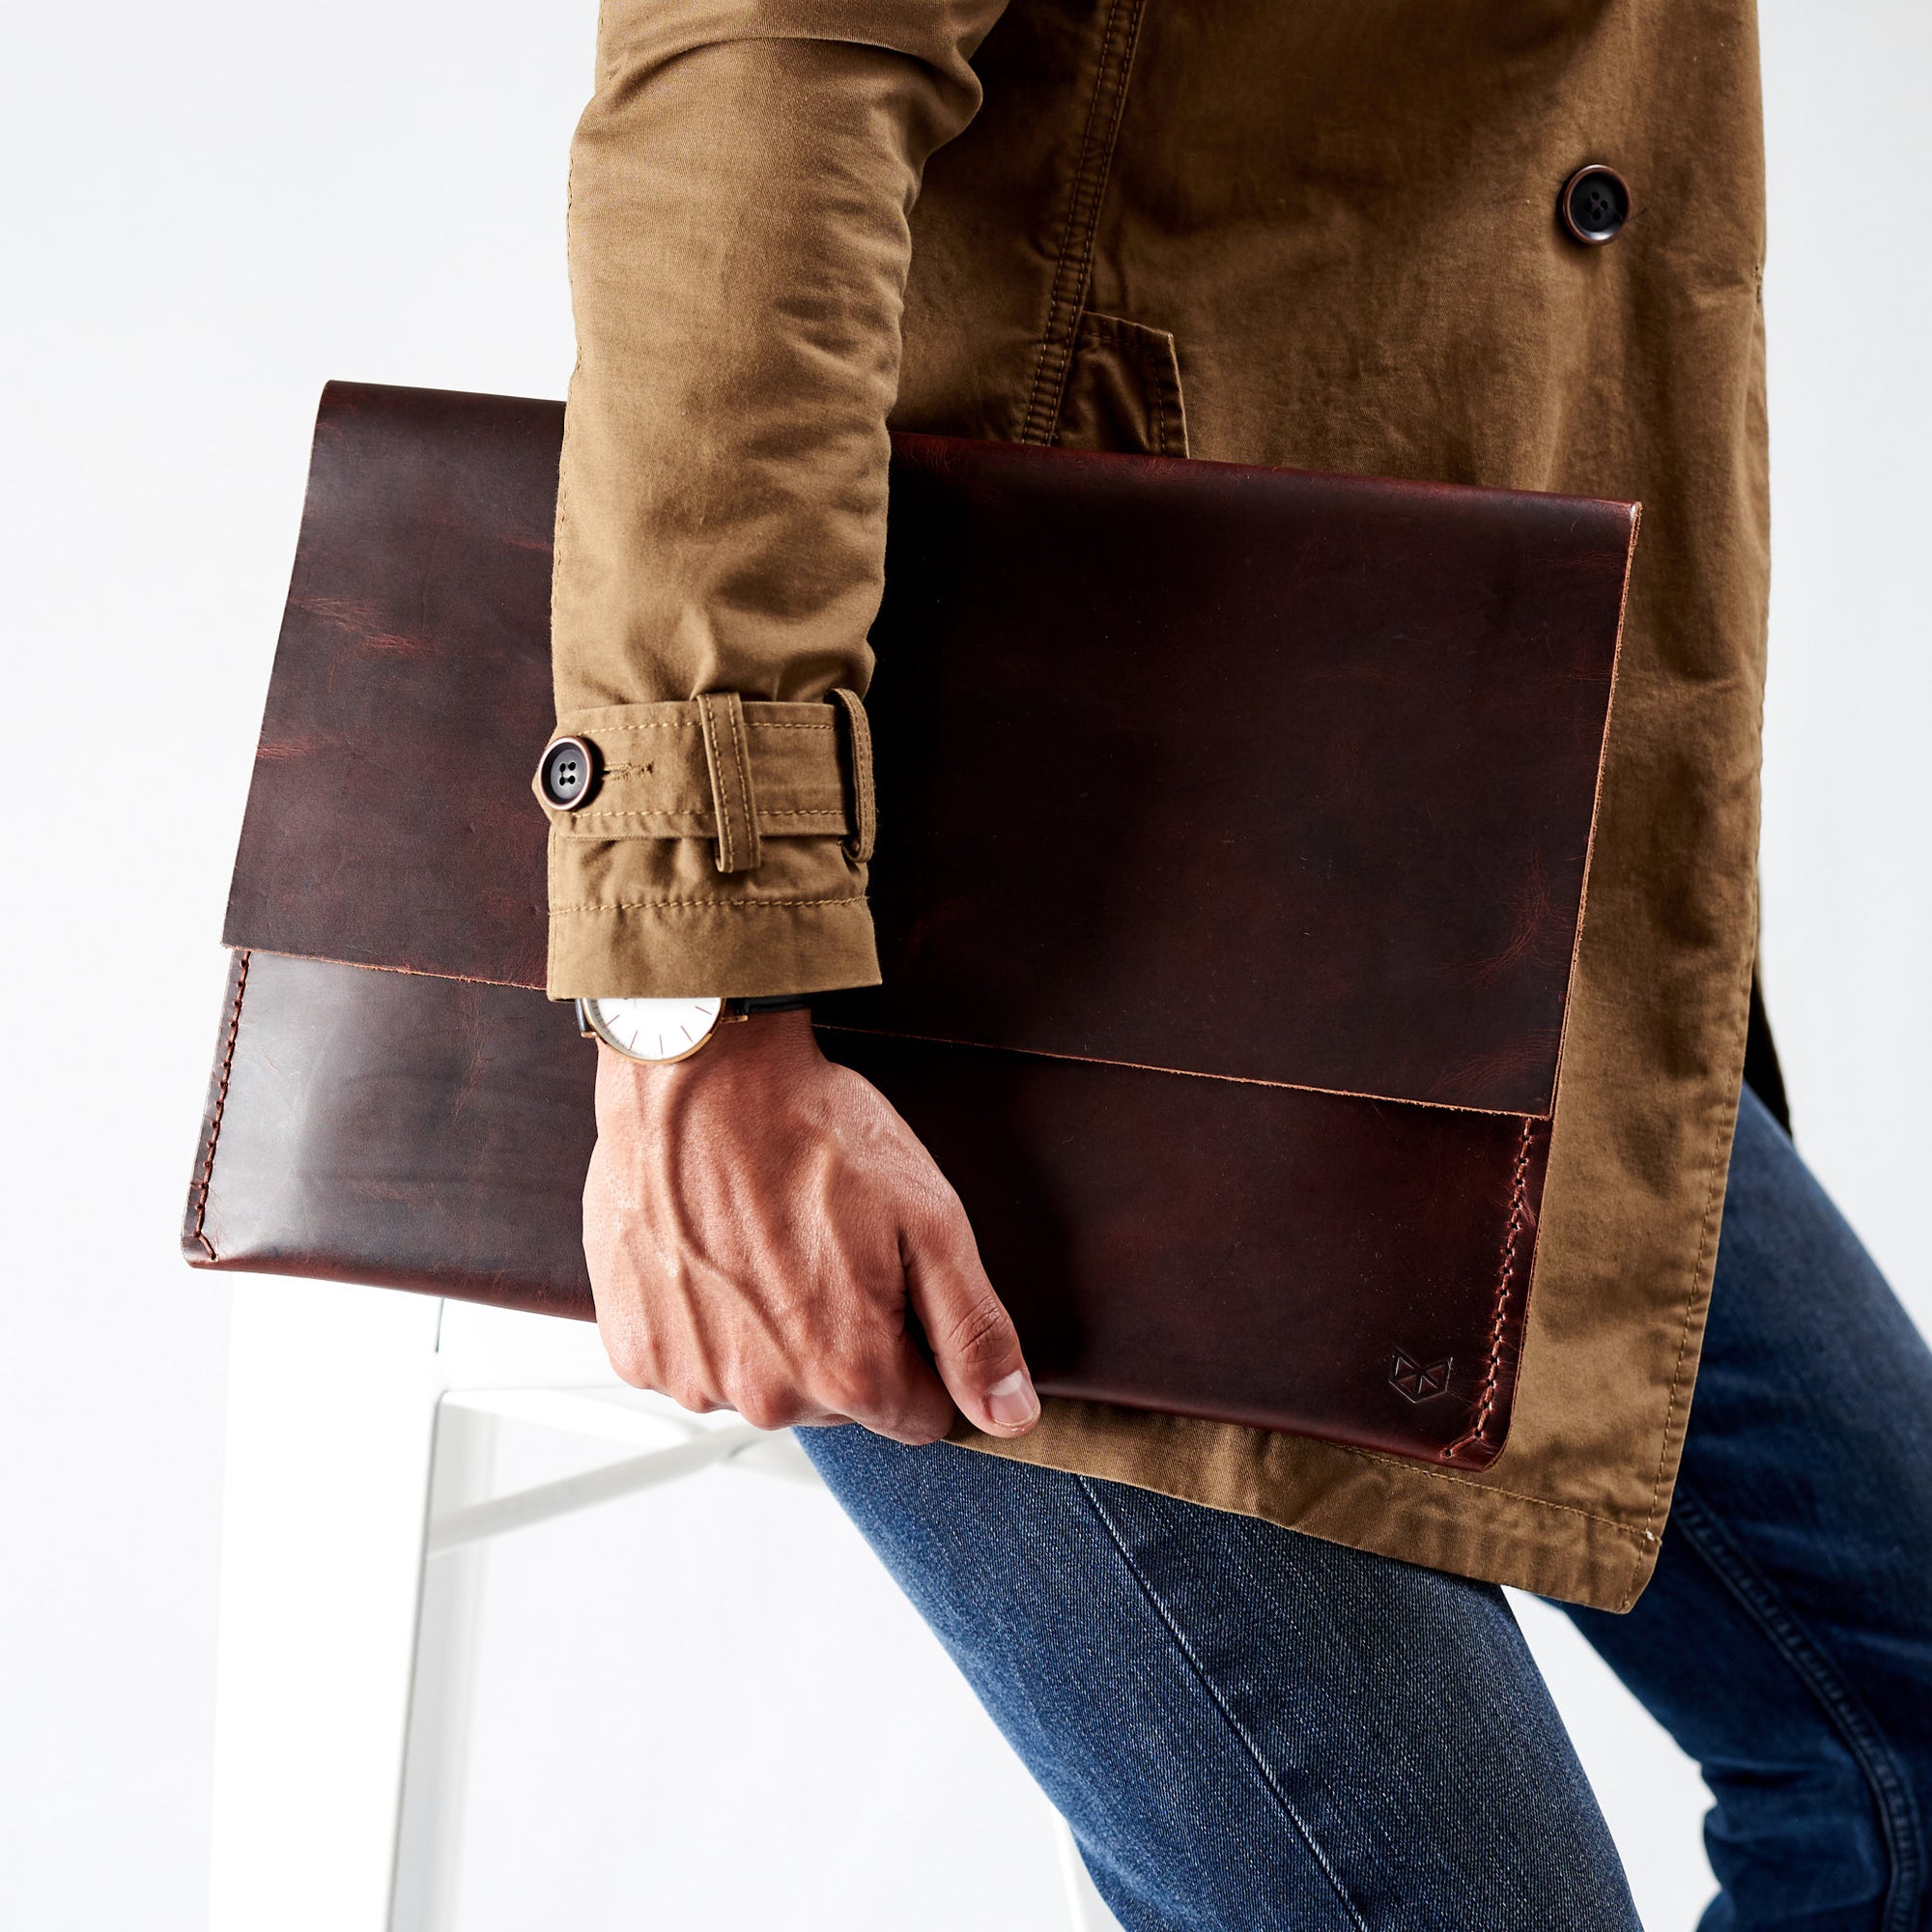 Case style with model. Leather Lenovo Yoga red brown Sleeve Case by Capra Leather